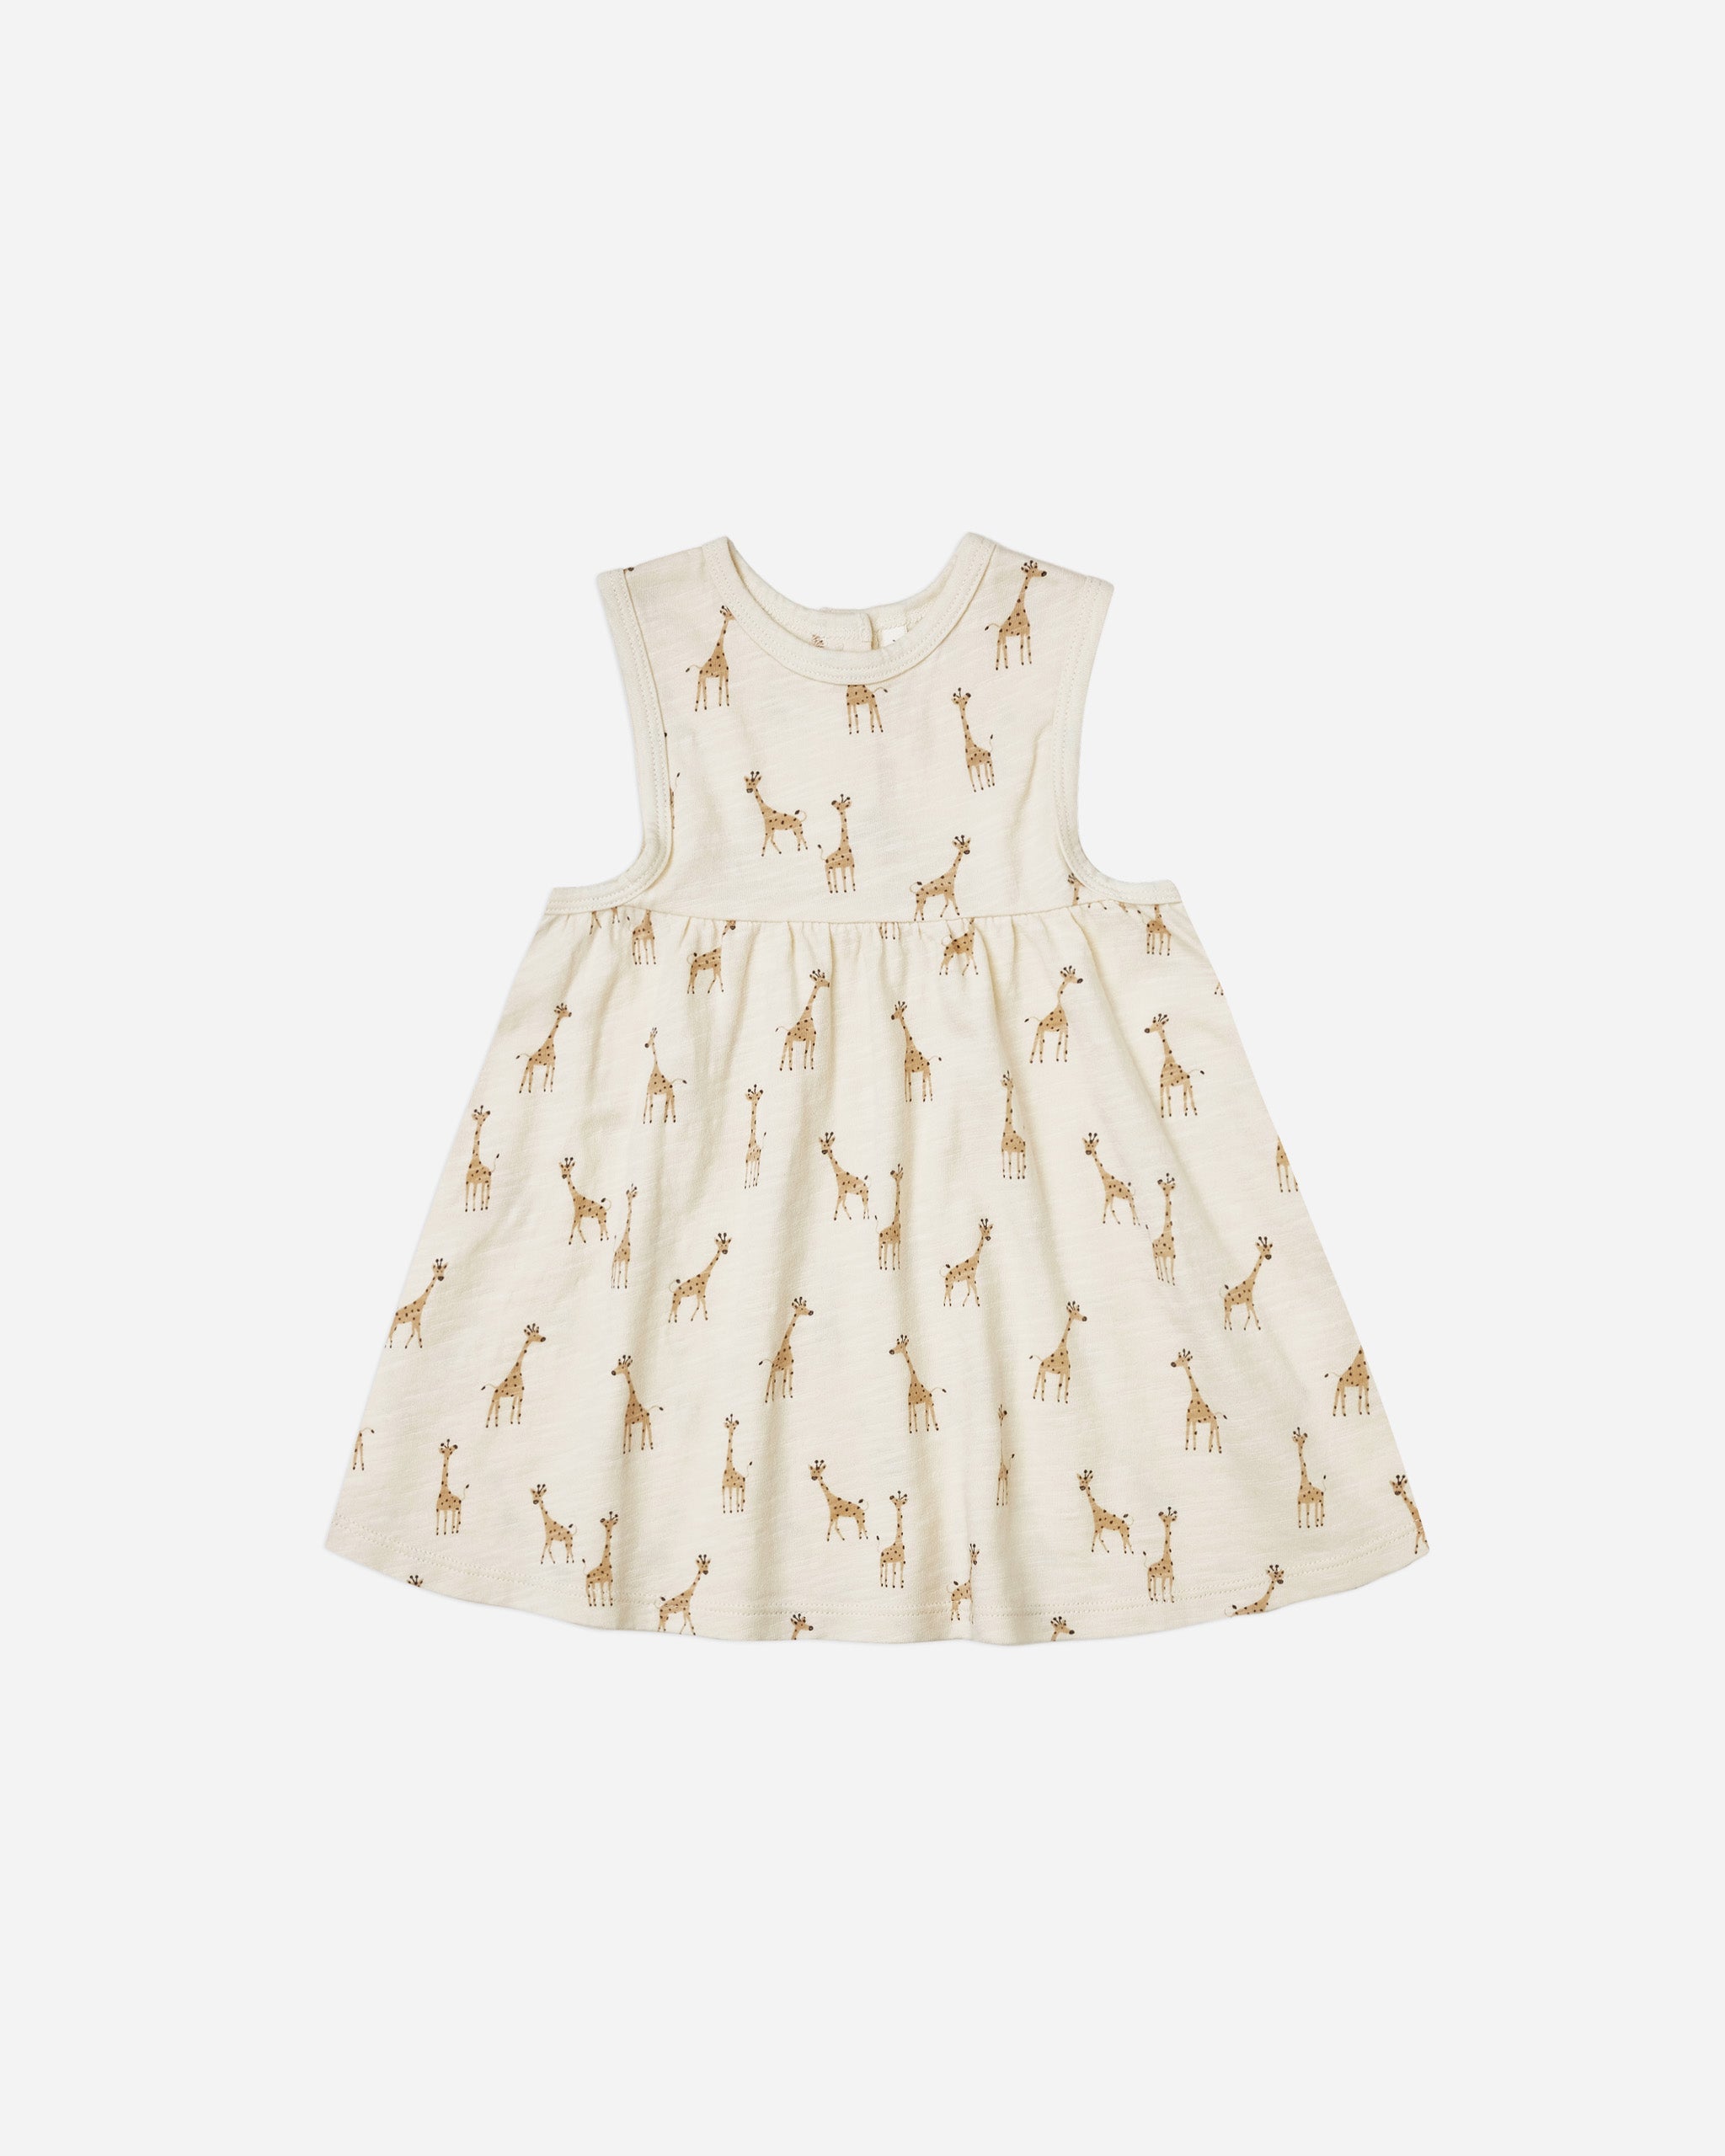 layla mini dress || giraffes - Rylee + Cru | Kids Clothes | Trendy Baby Clothes | Modern Infant Outfits |